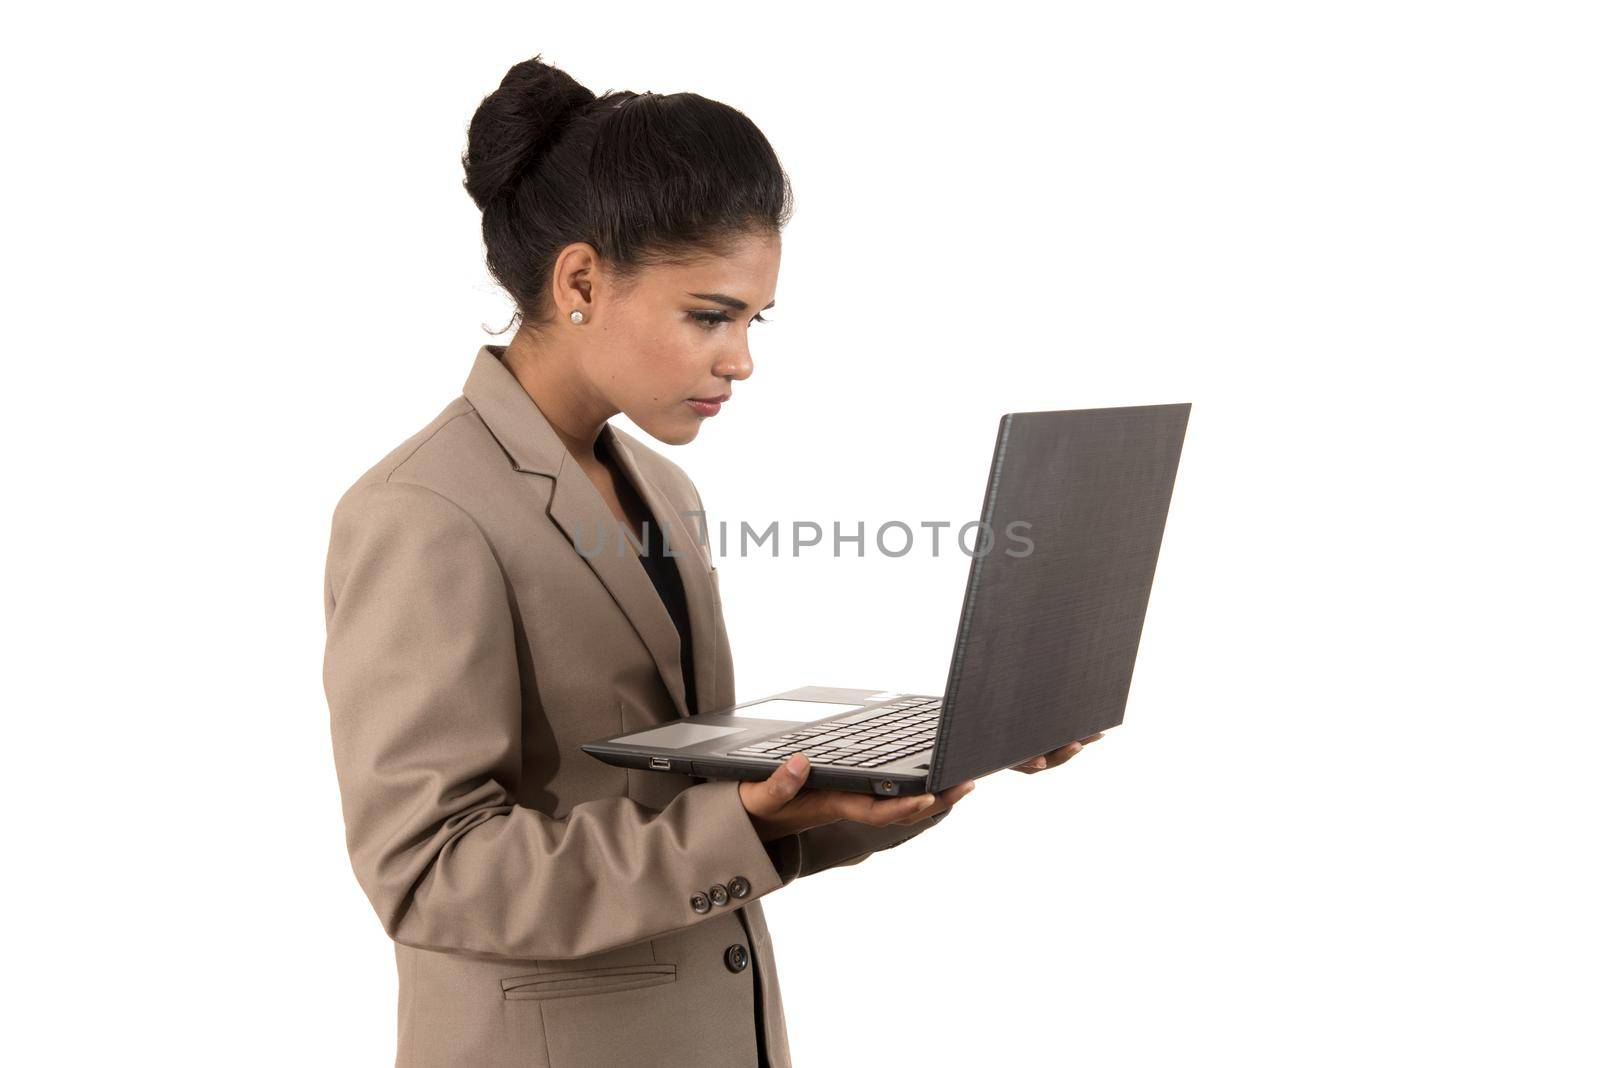 Young happy smiling woman holding laptop.